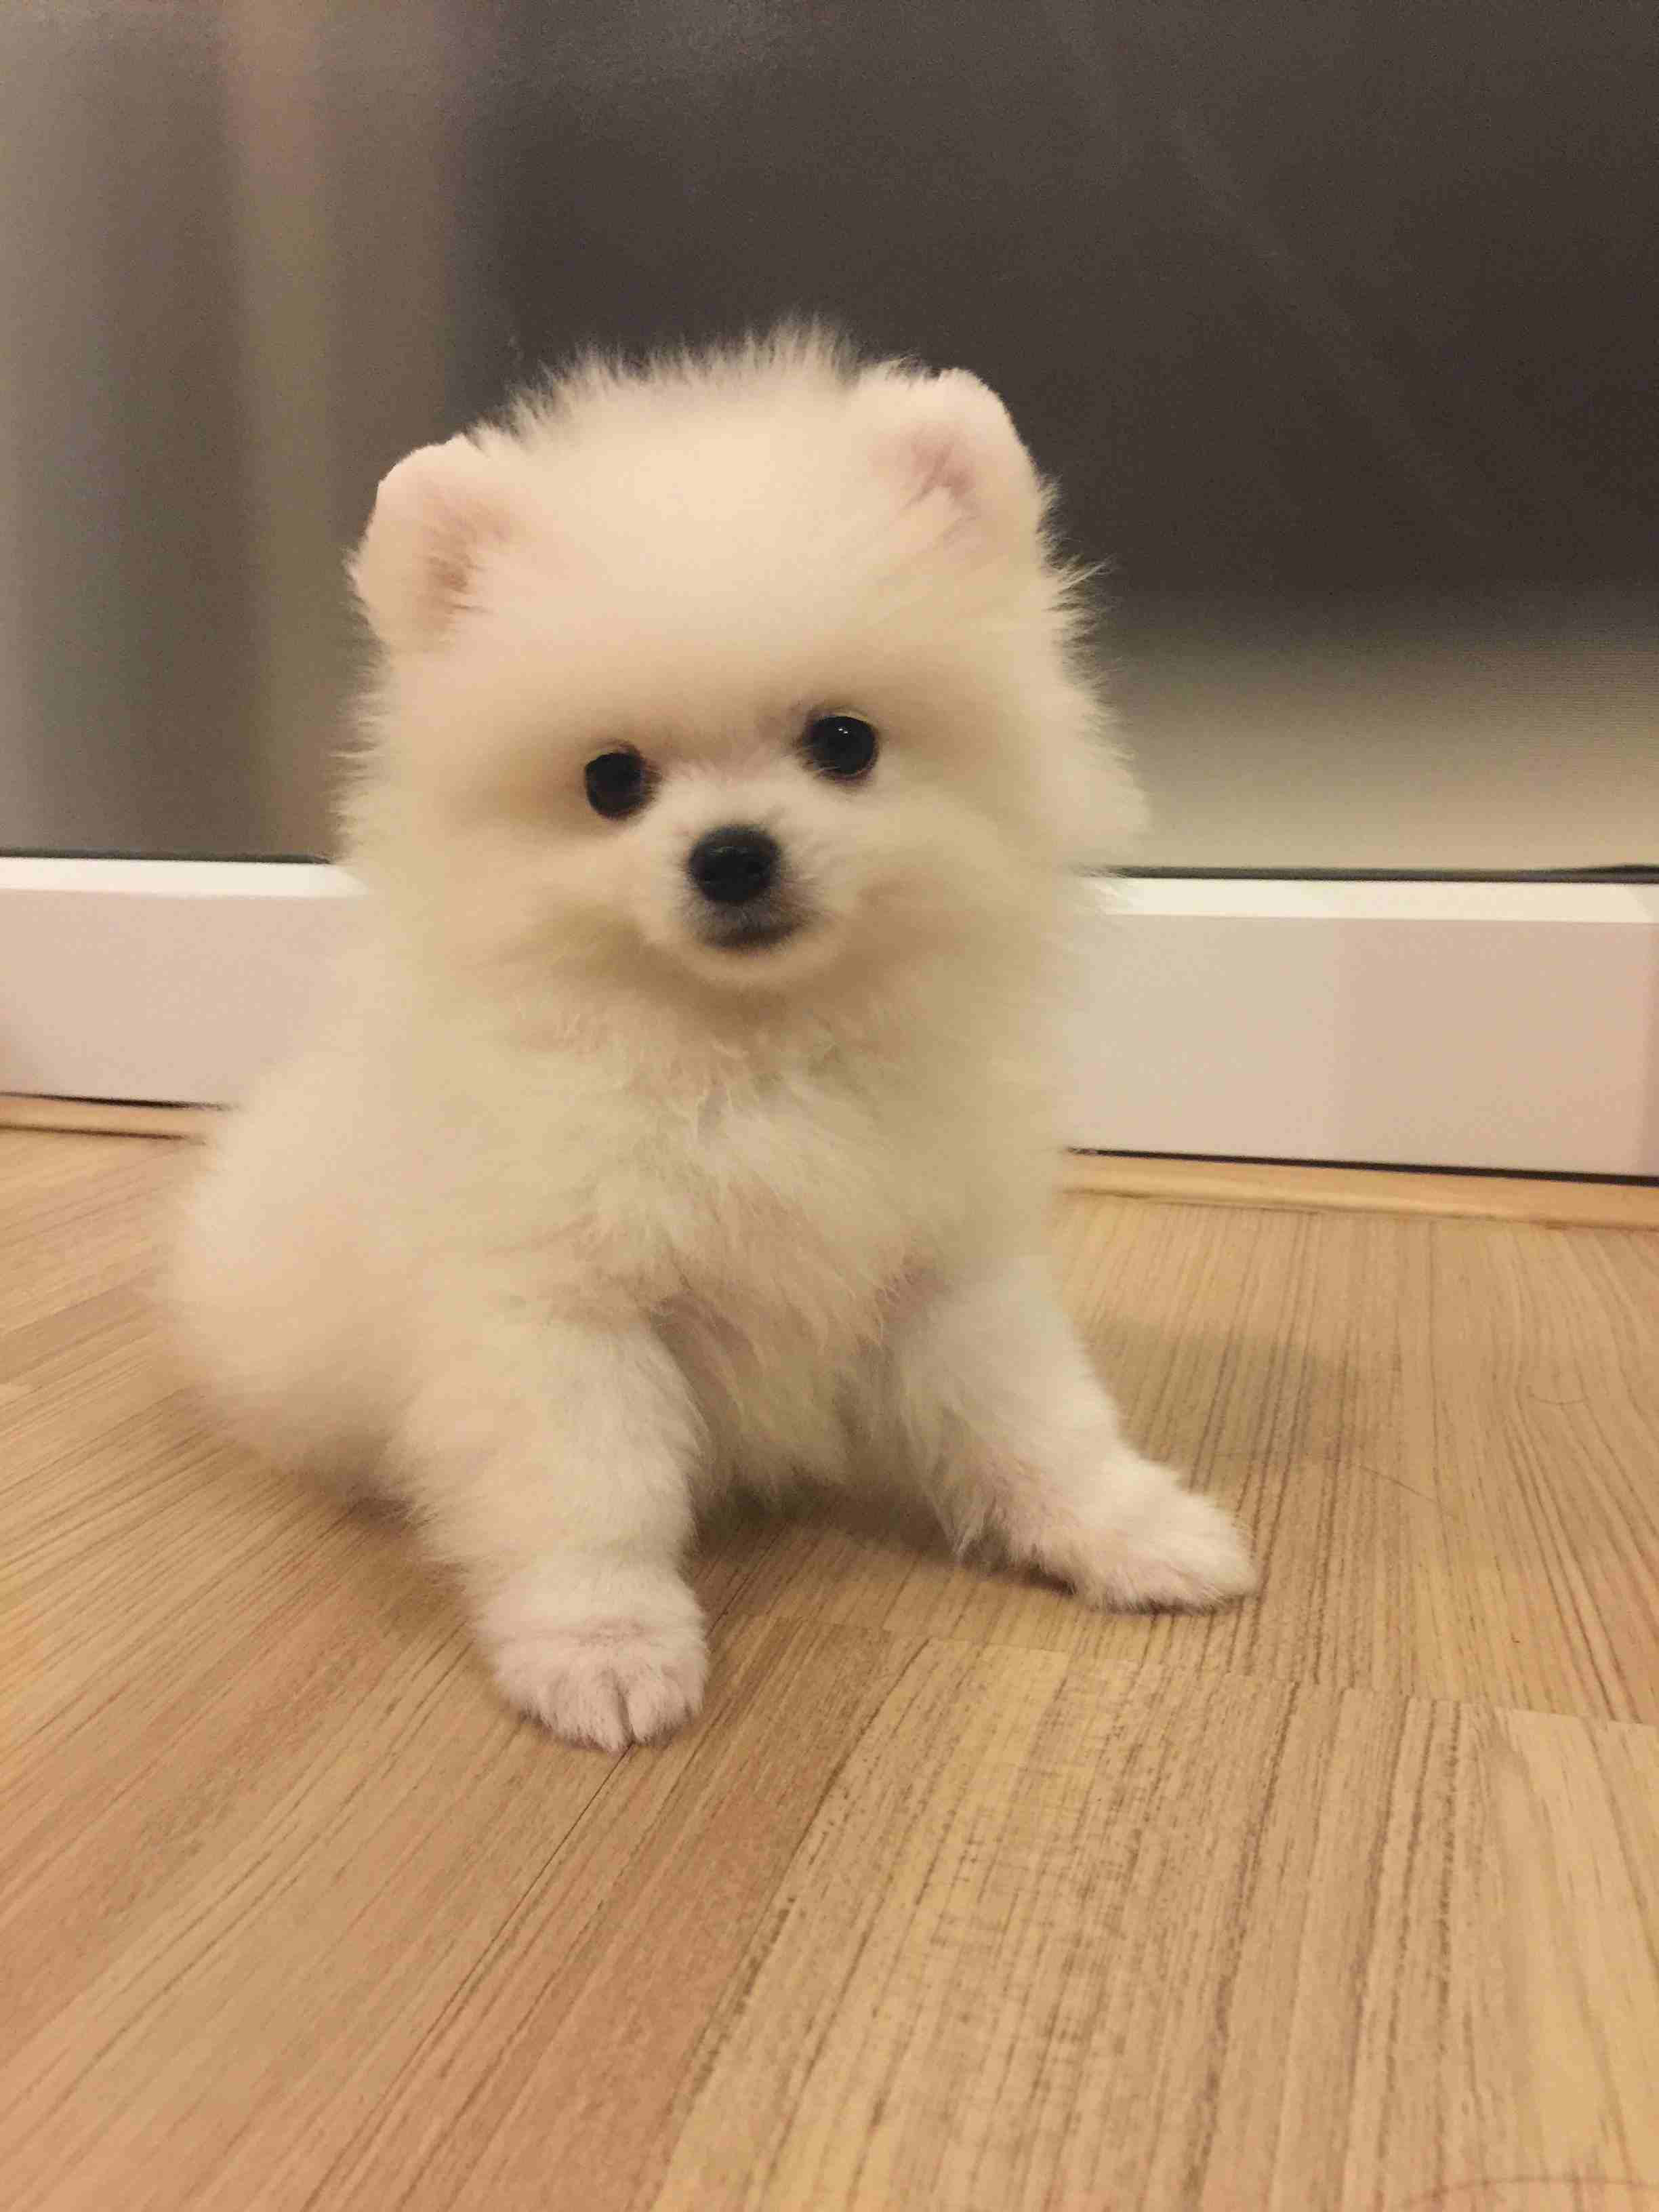 Awesome Teacup pomeranian puppies ready nowMy clever beautiful friendly puppies one lovely boy and one beautiful girl. These babies have been vet checked and ha-  Awesome Teacup pomeranian...